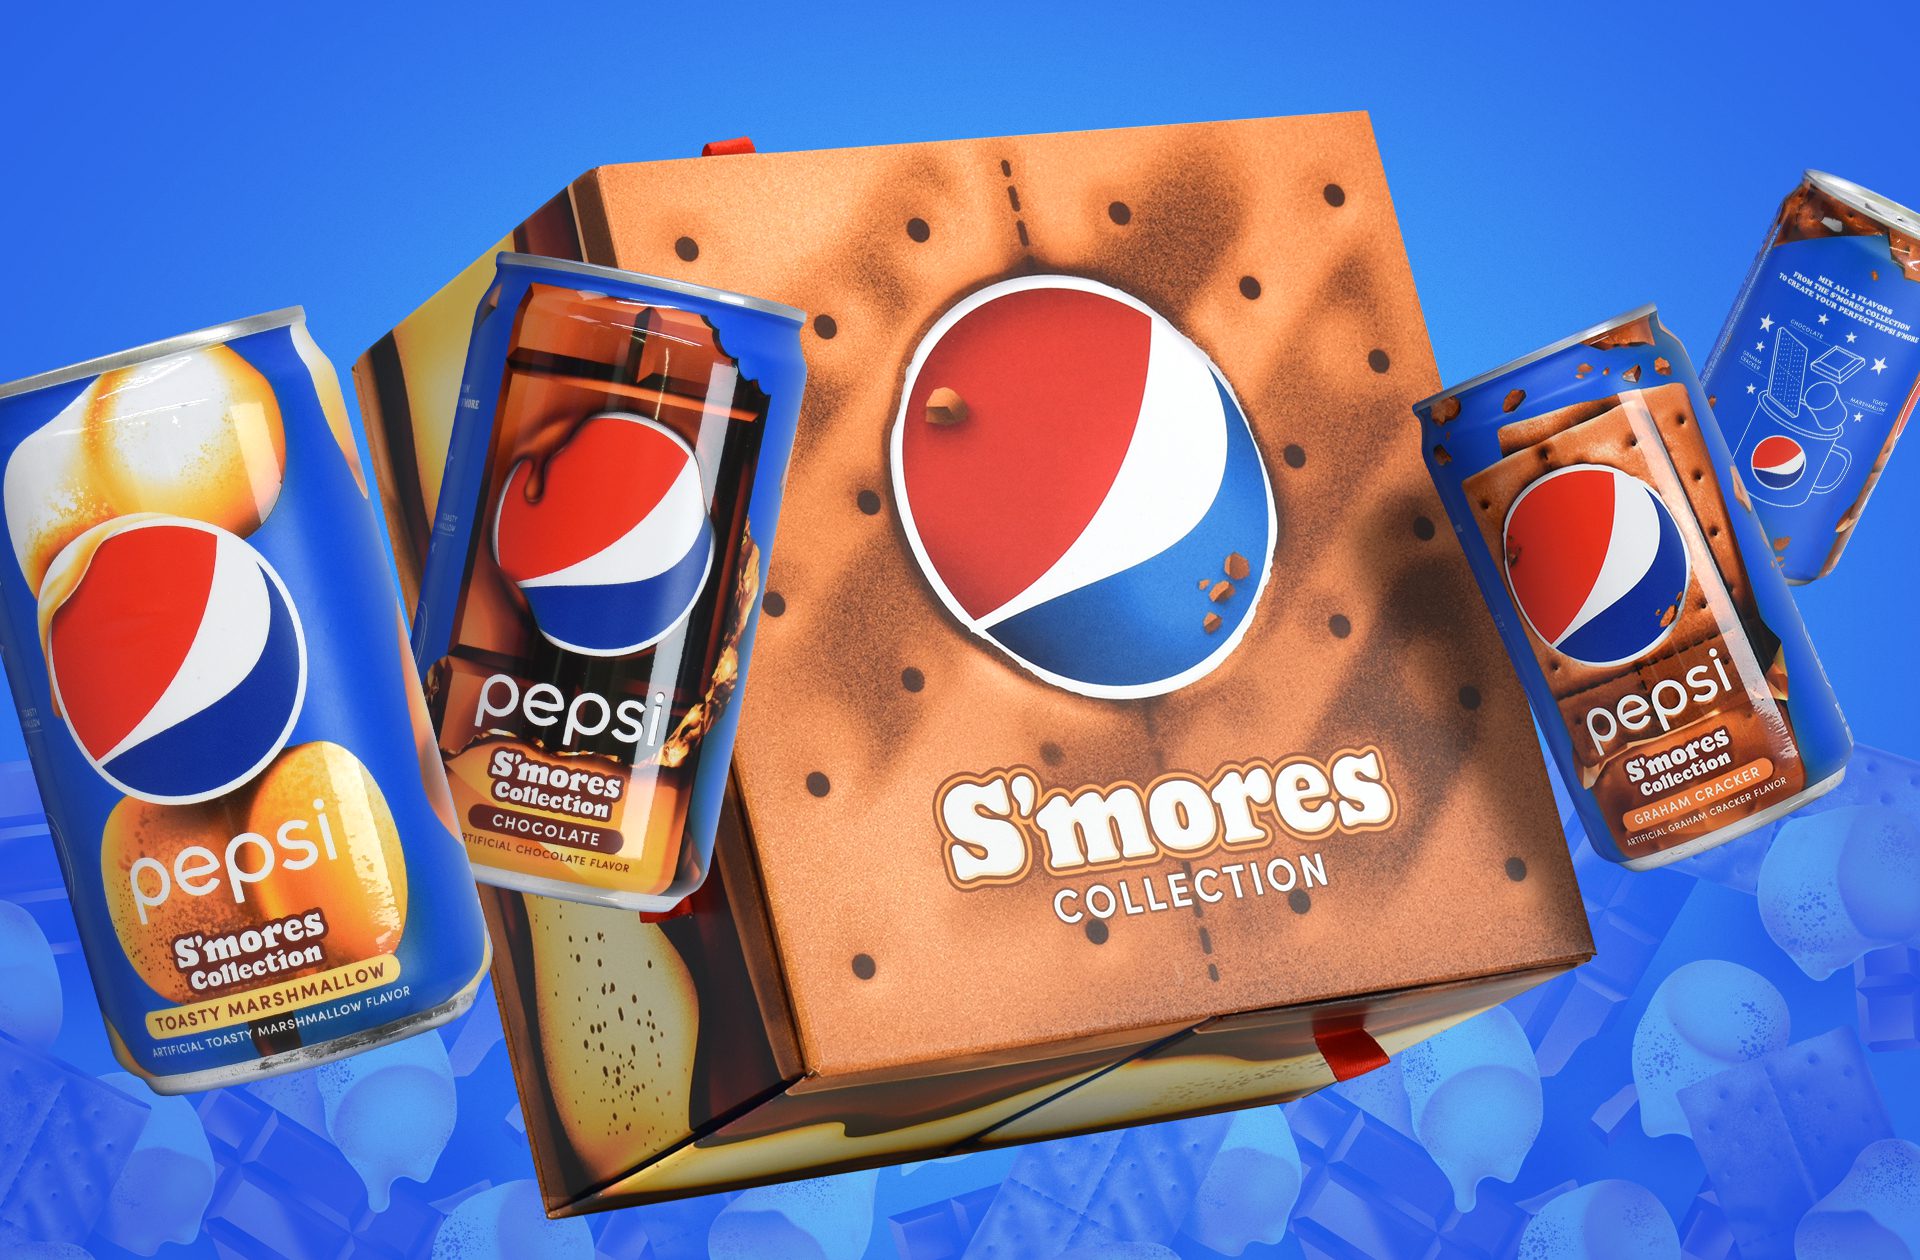 Beauty shot of an Influencer Unboxing Experience promoting the limited time Pepsi S’mores collection, together with four cans of Pepsi in different promotional flavours.